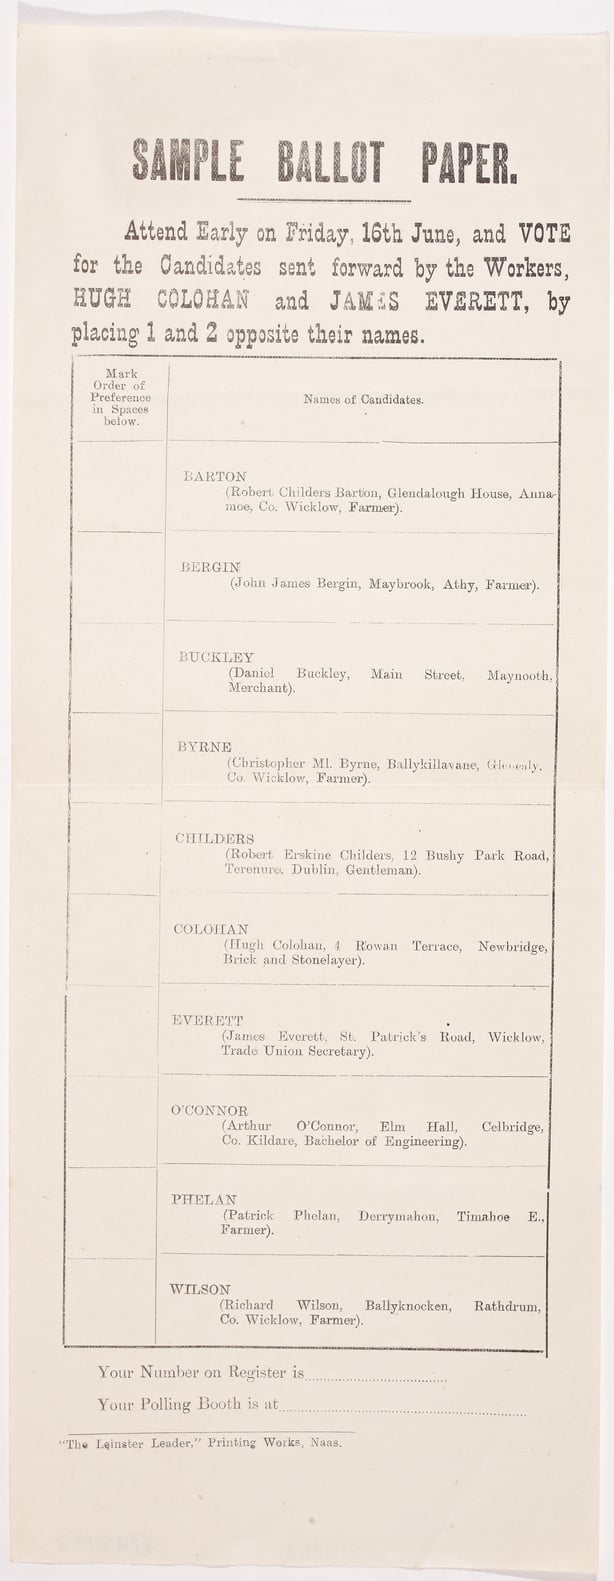 Sample ballot paper in 1922 seeking support for the Labour party